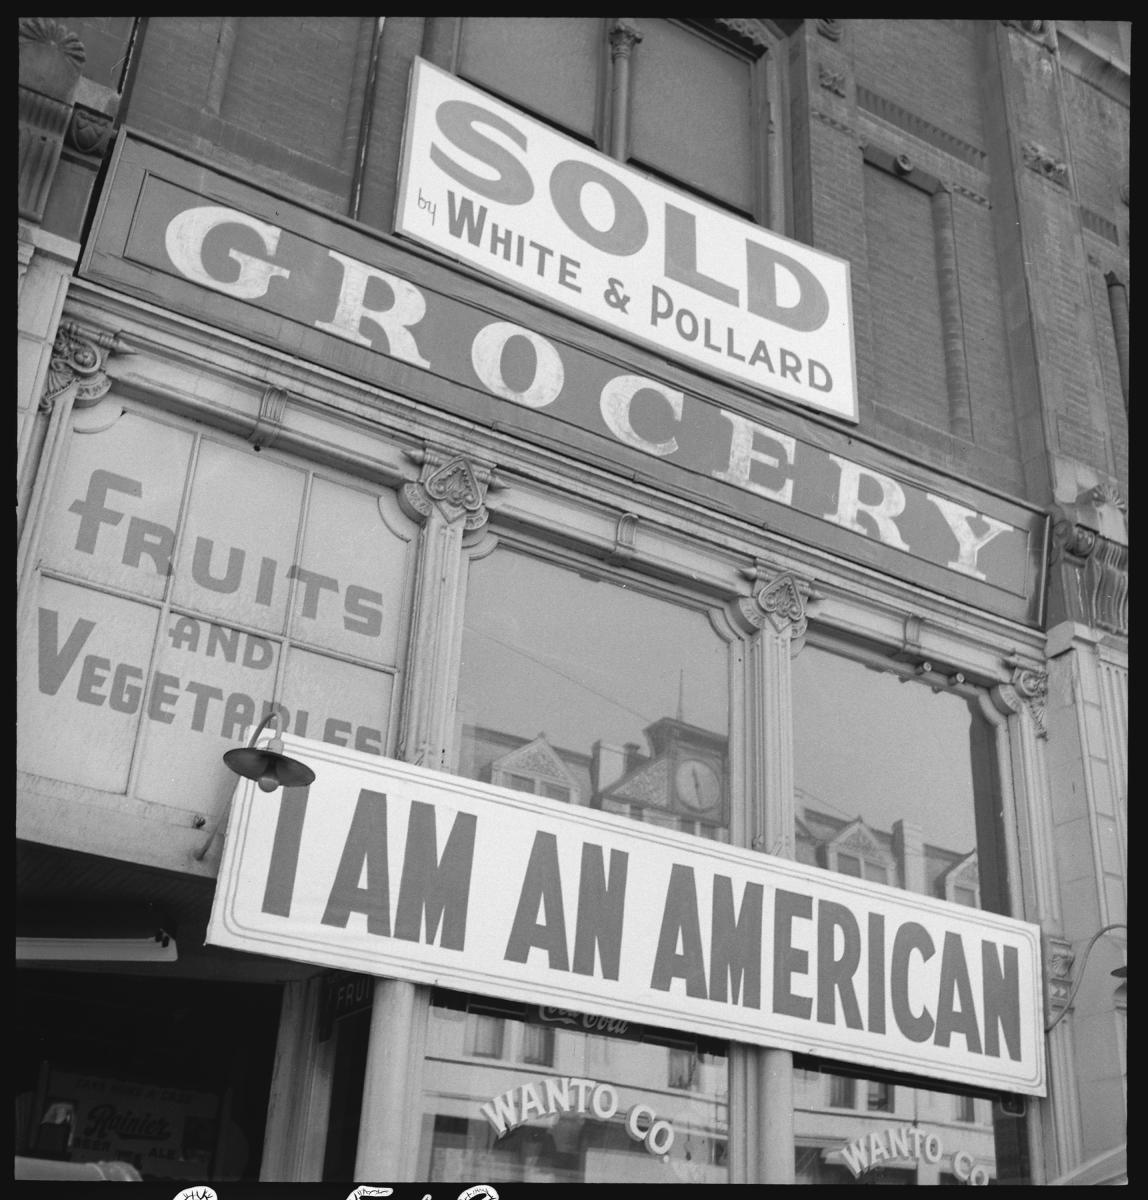 I am an American” sign hung by the storefront owner of Japanese descent the day after Pearl Harbor, photograph by Dorothea Lange.